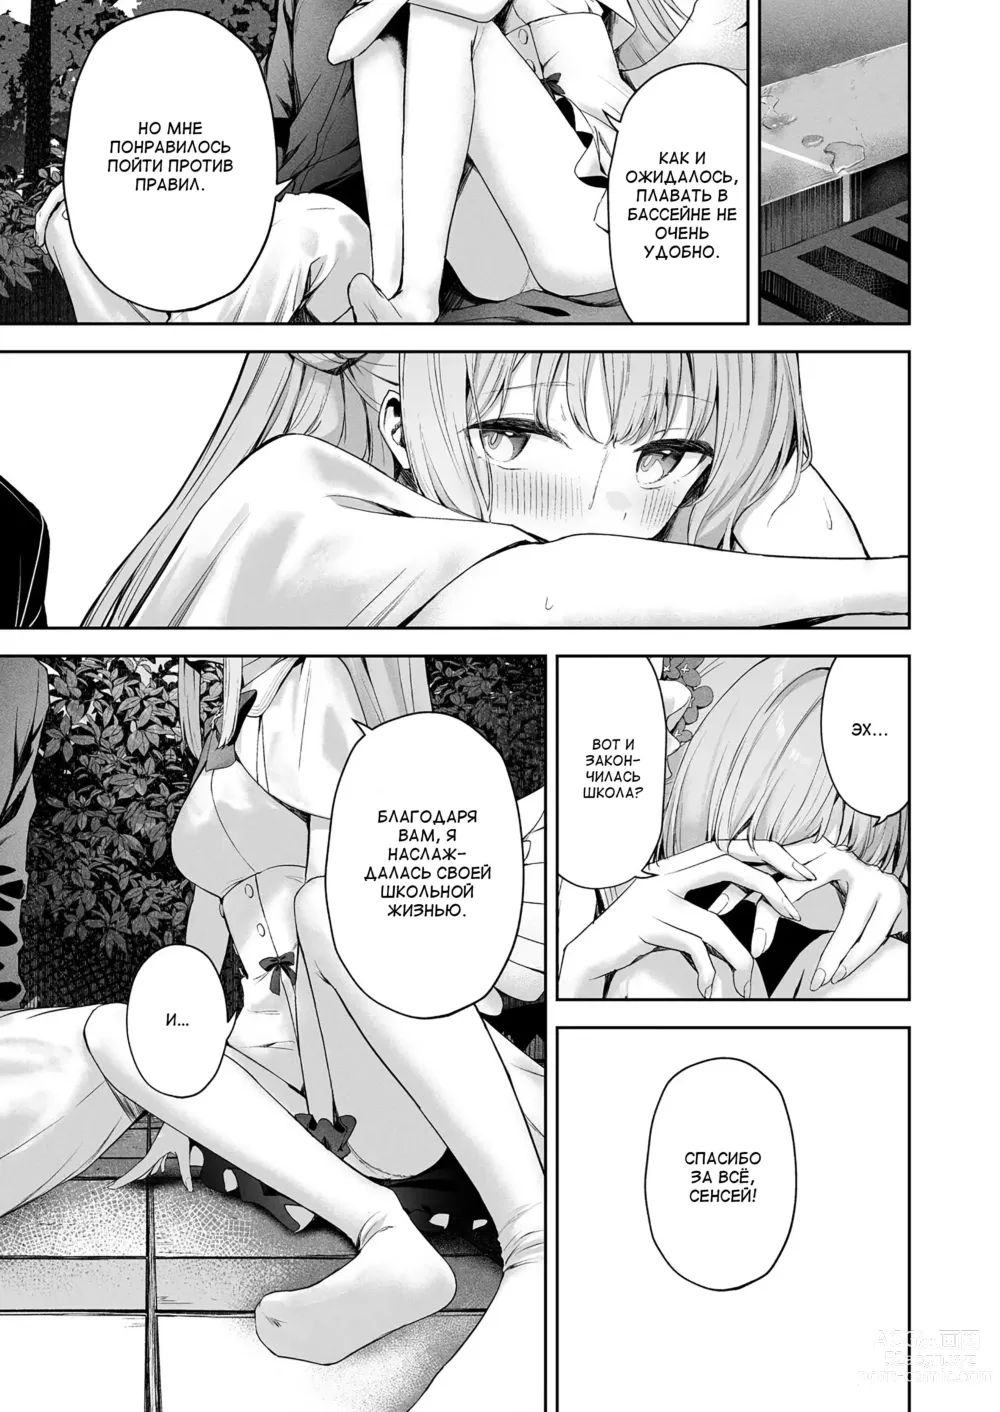 Page 6 of doujinshi Daydream kara Samete - THE END OF DAYDREAMING